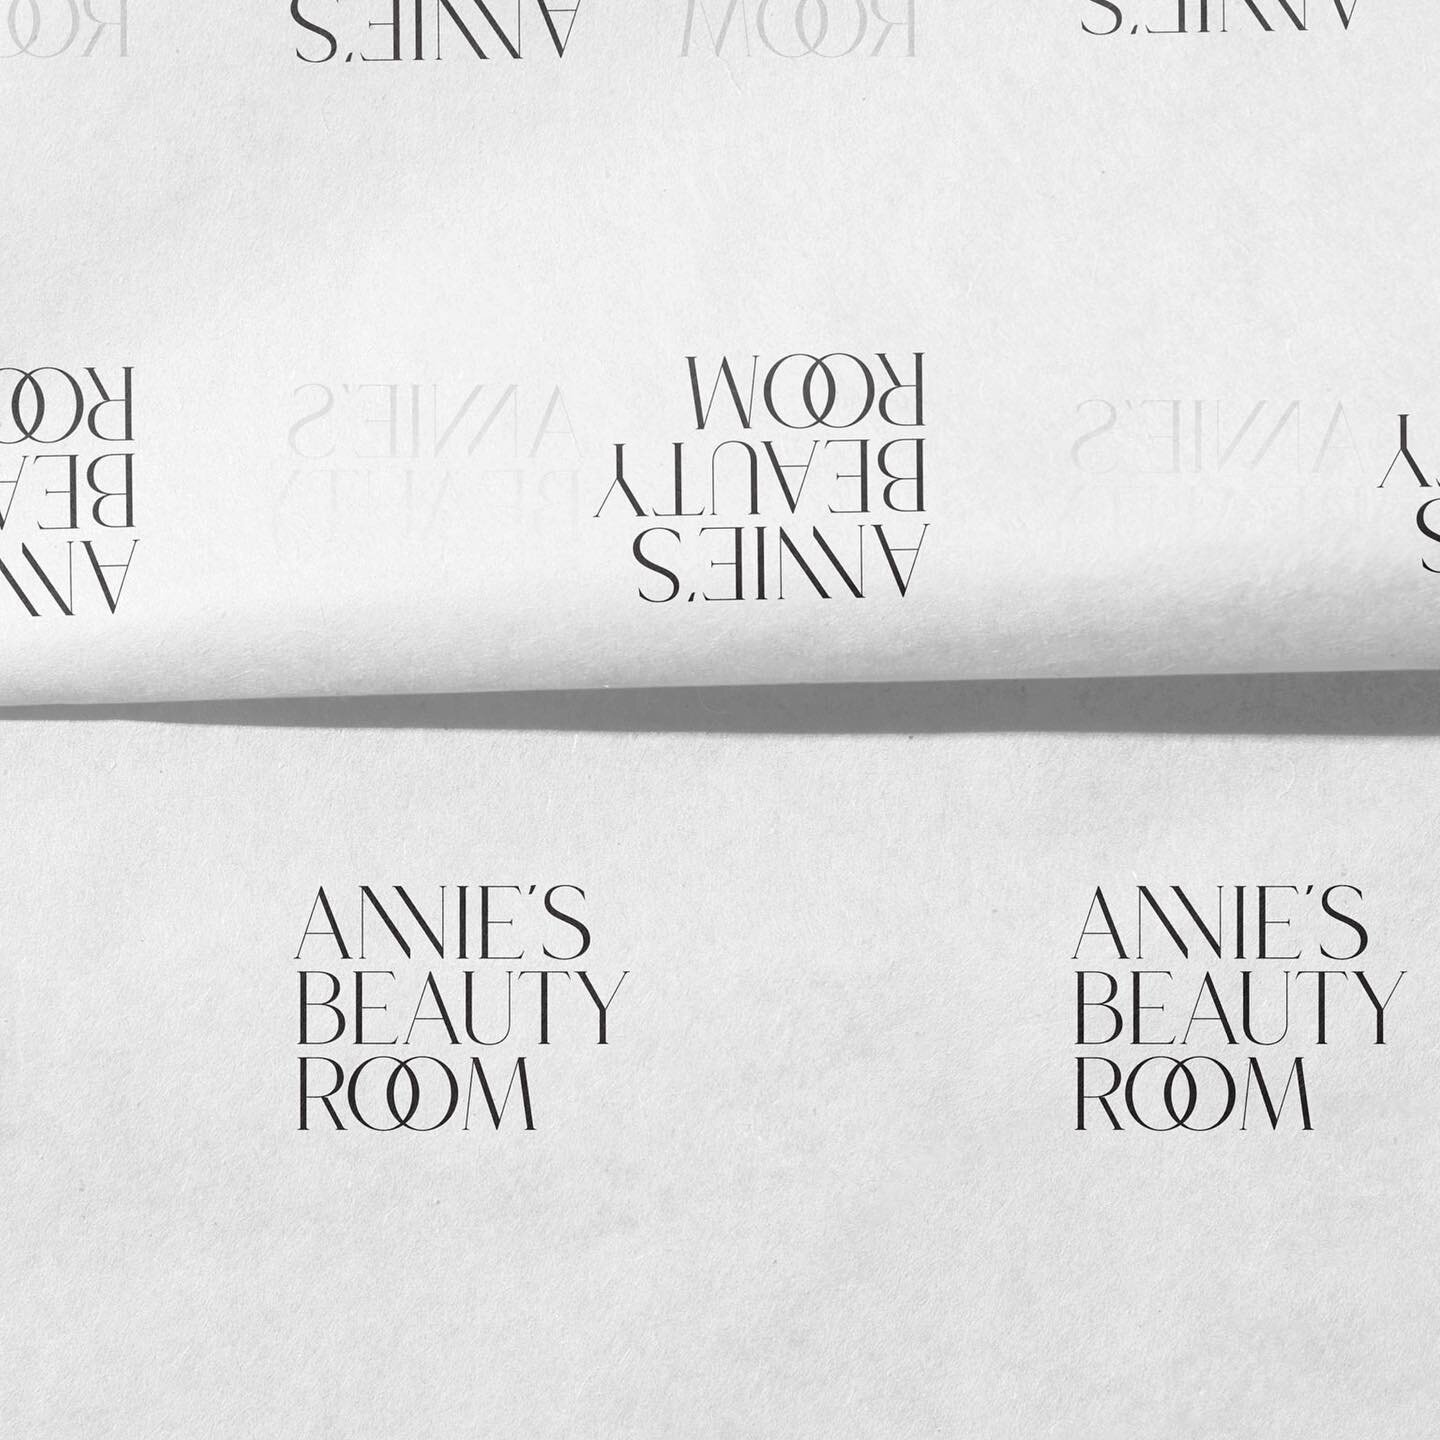 We've been a tad quiet lately, but boy do we have some exciting projects to share with you! We teamed up with the fabulous Annie from @anniesbeautyroom_ to give her brand a fresh new look.

We also collaborated with Annie to create her very own skinc